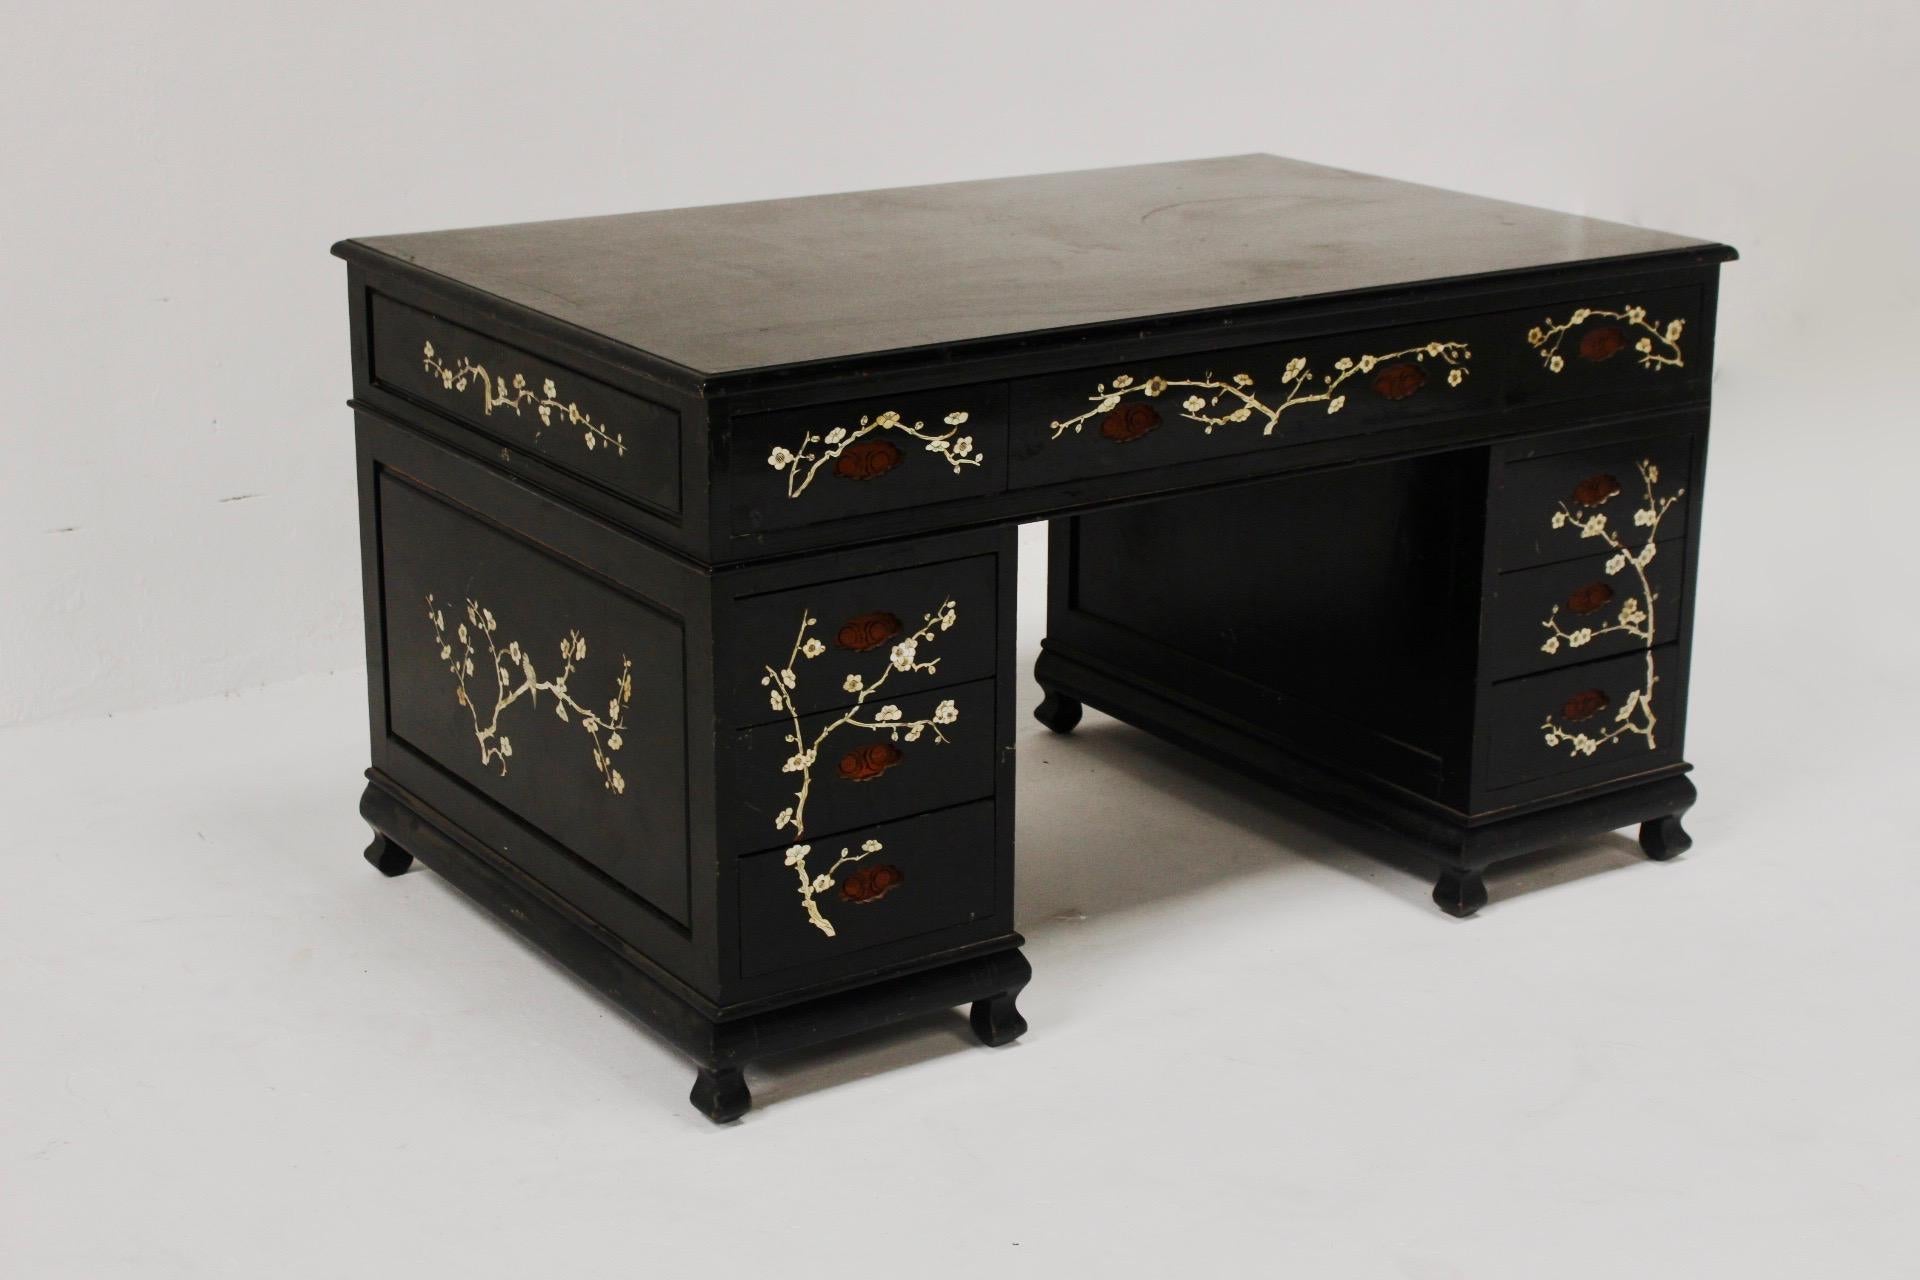 Chinoiserie Back Lacquered Art Deco Mother of Pearl Inlay Desk, Spain, 1940s For Sale 5